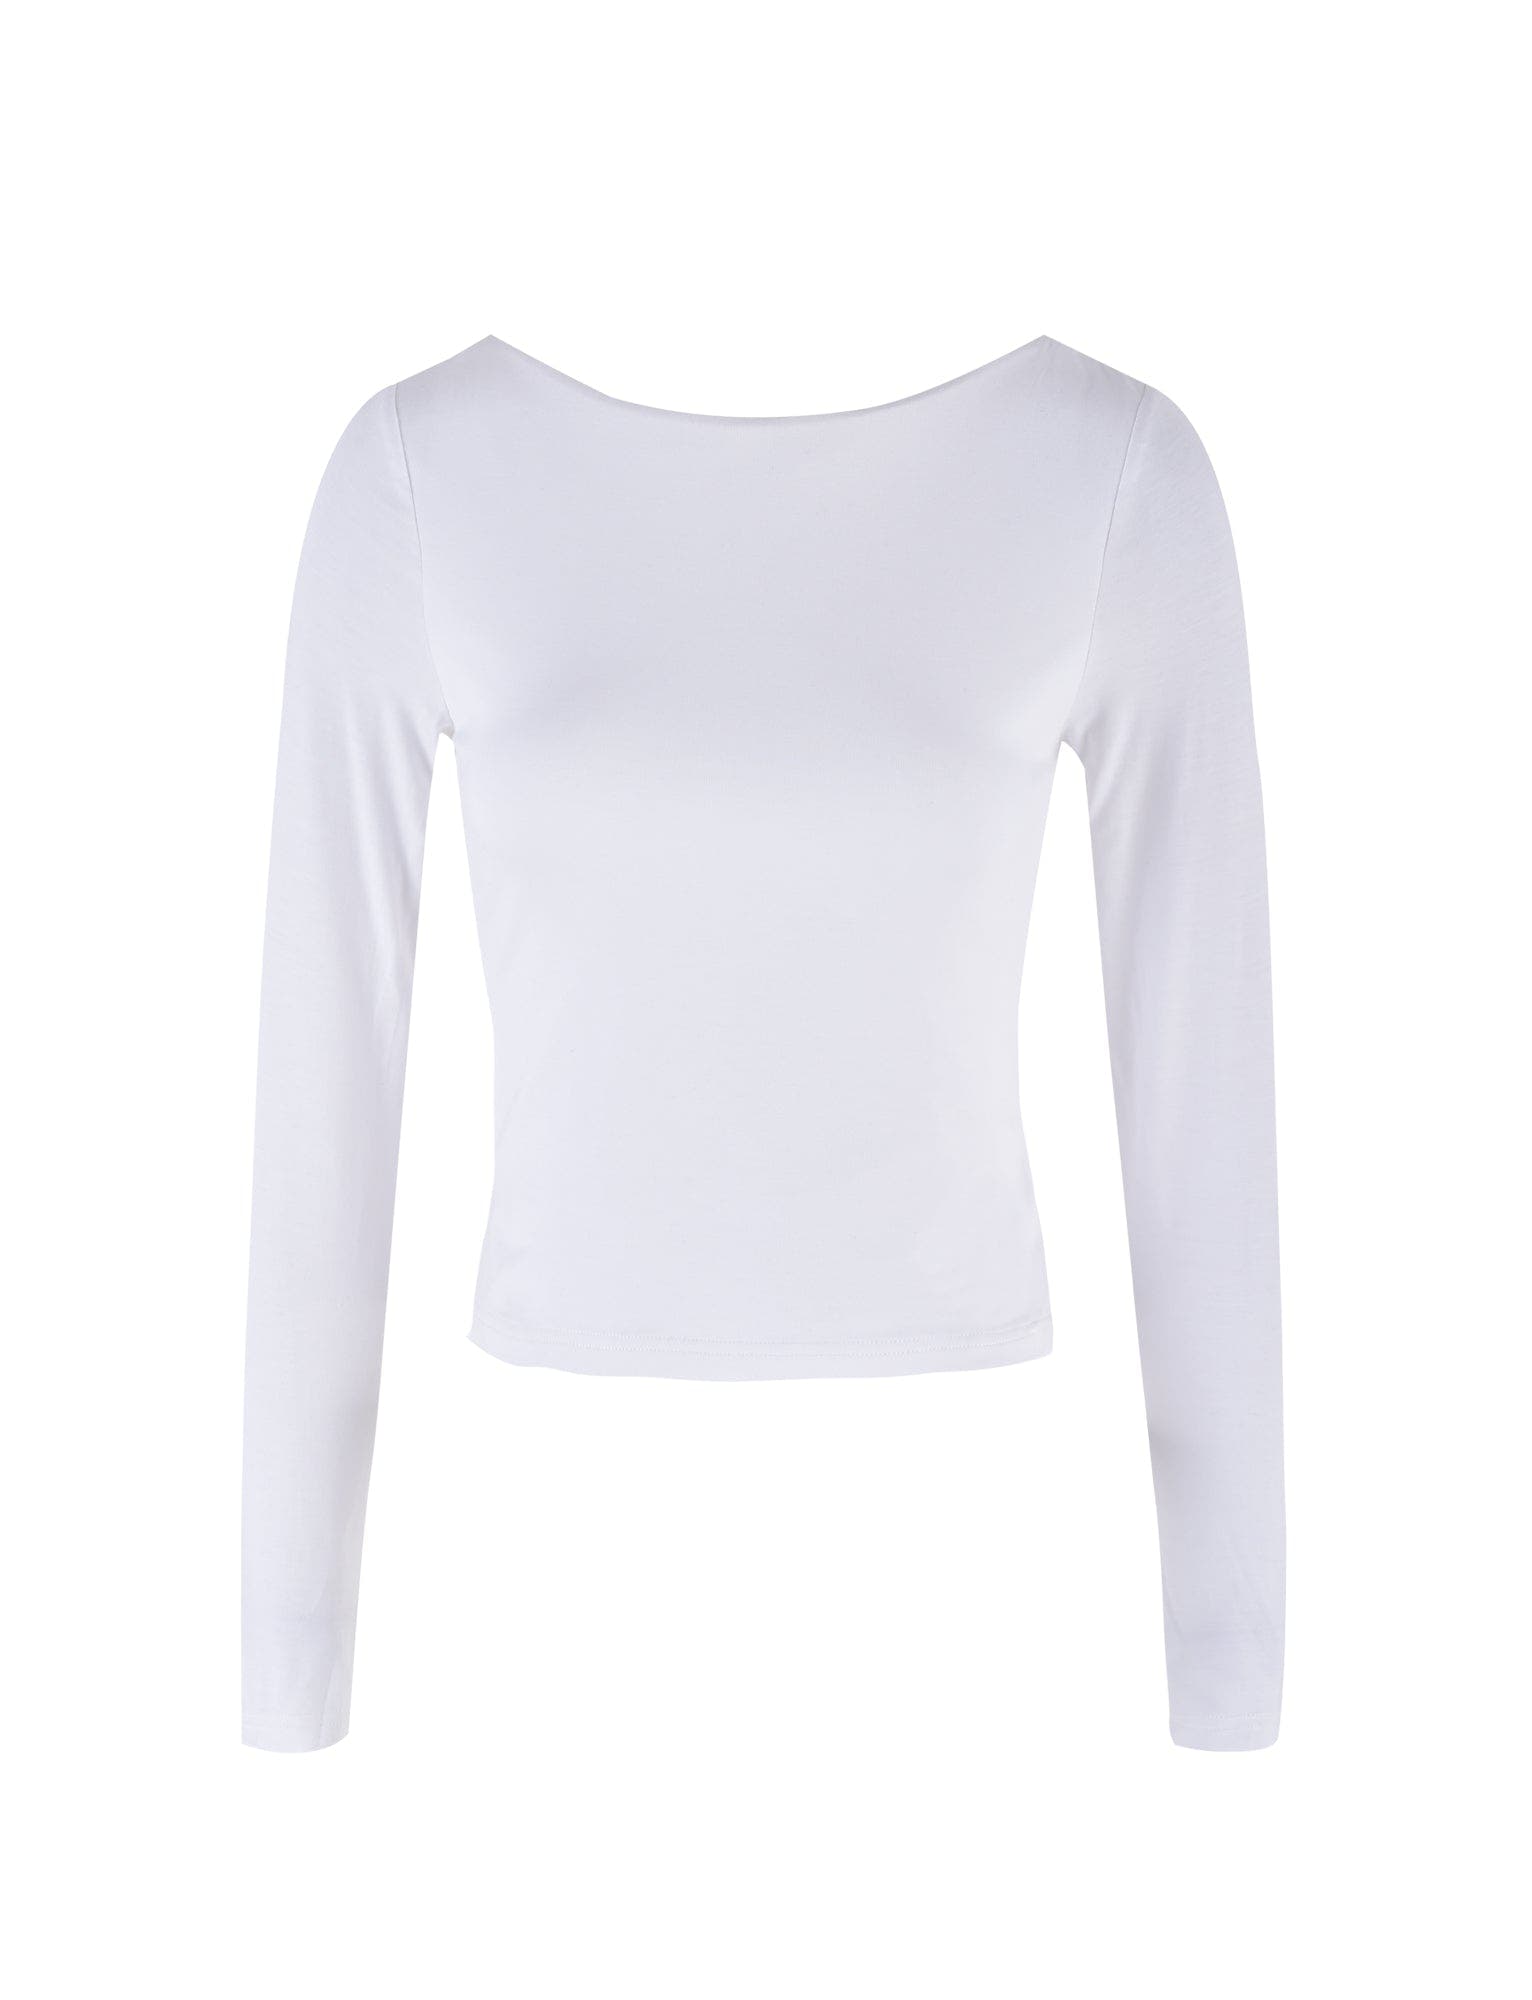 QUINNELL TOP - WHITE